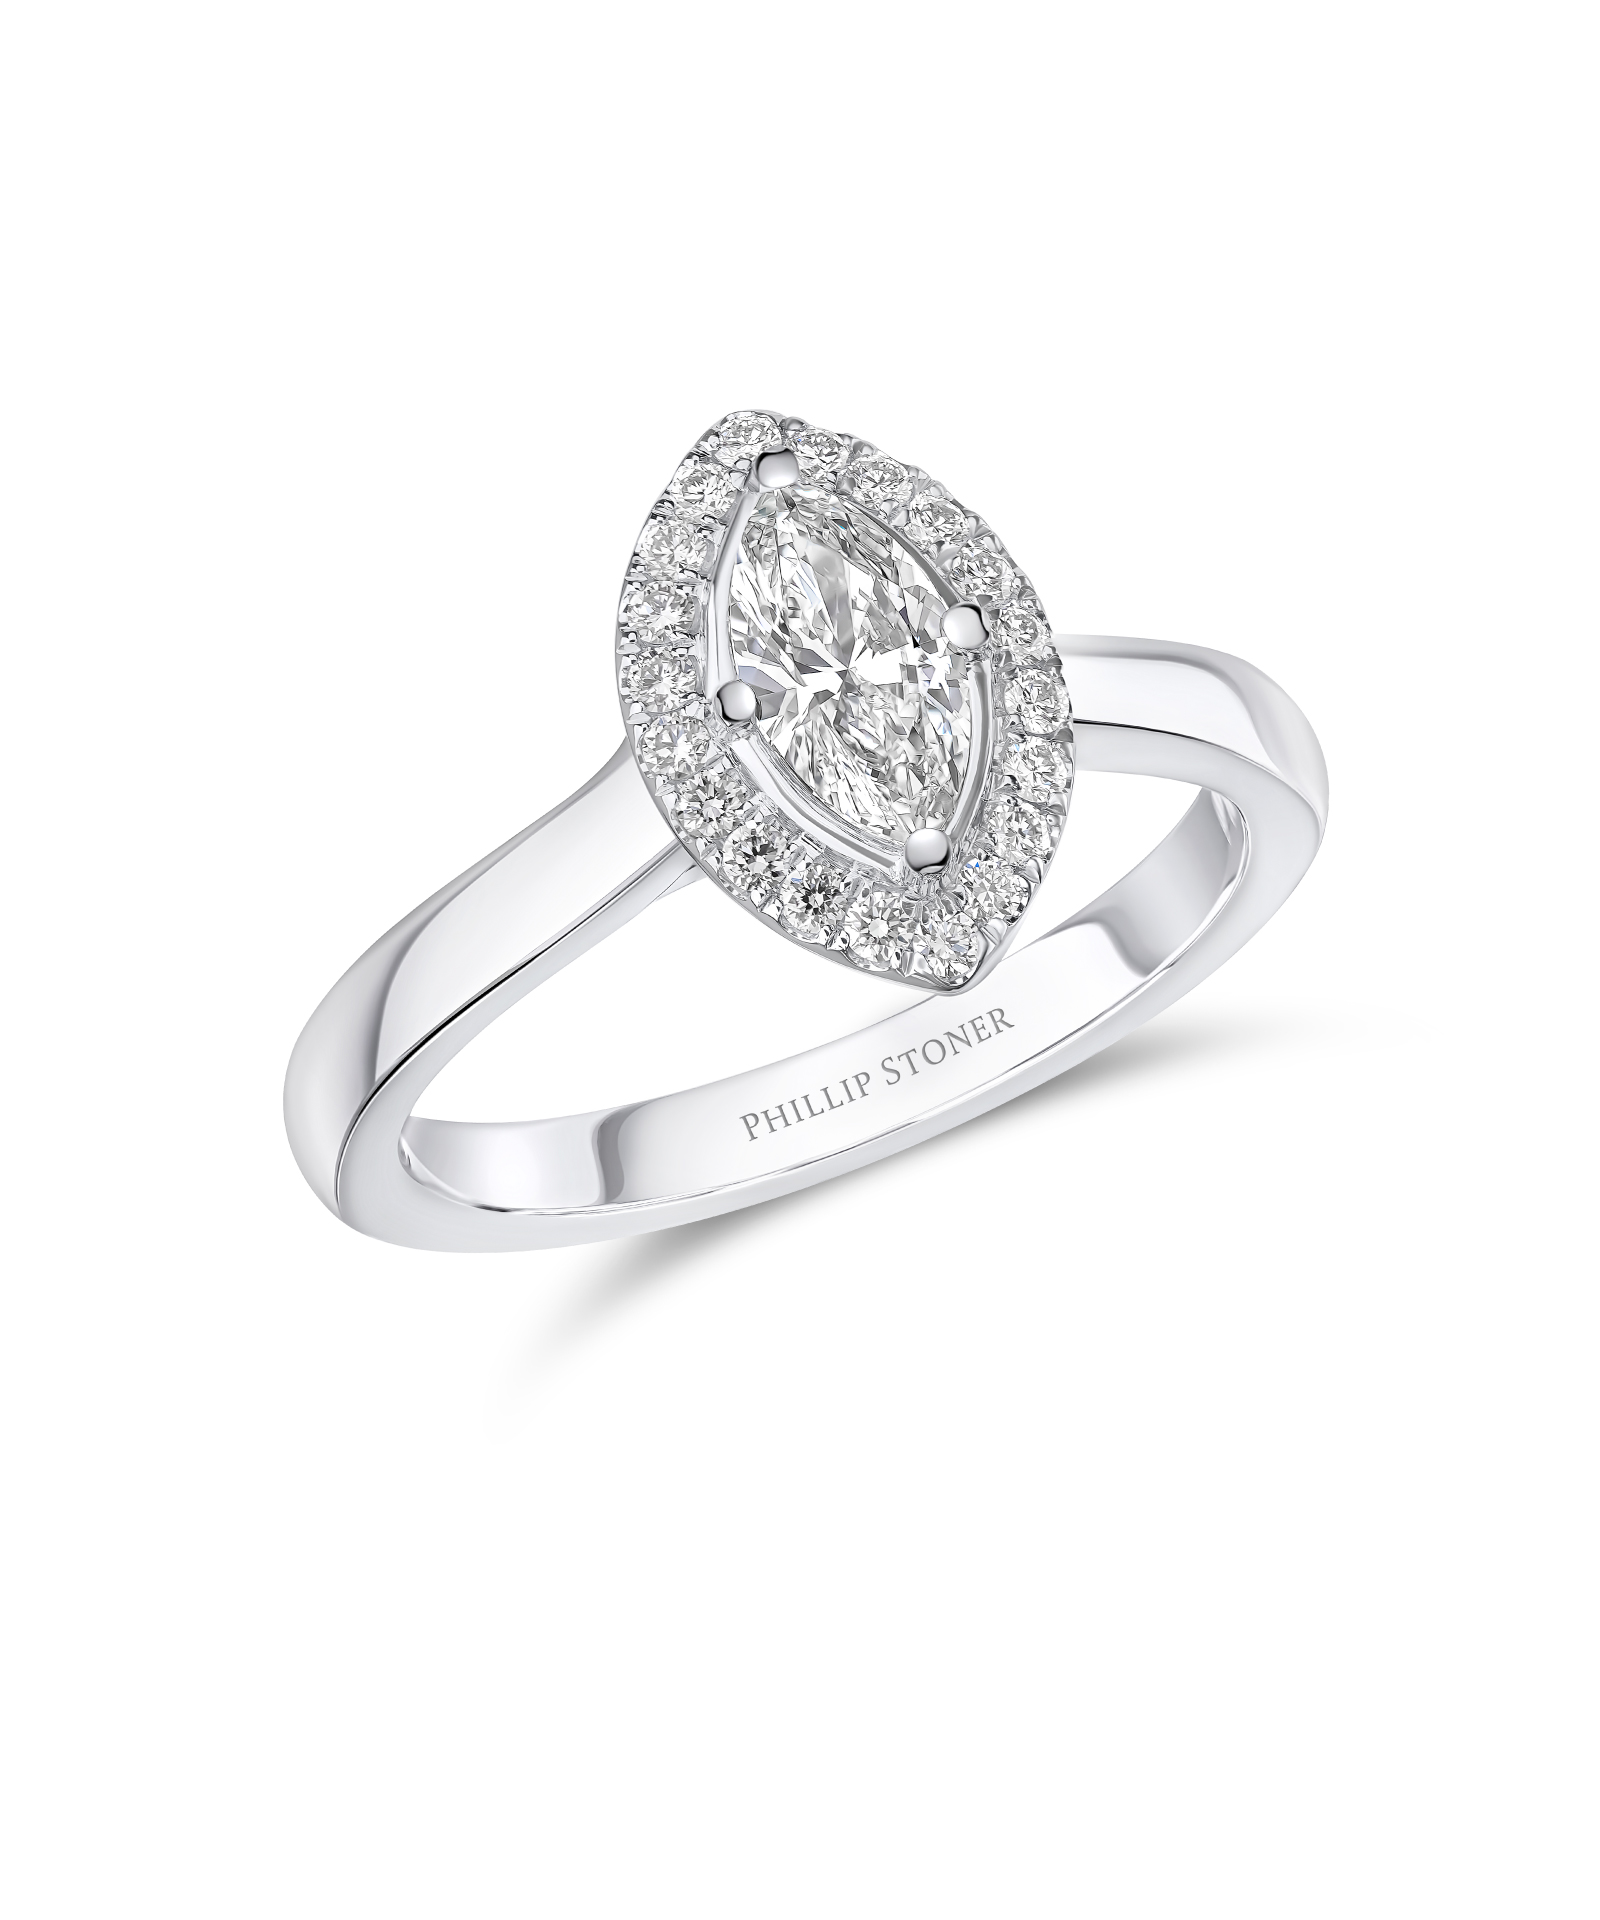 0.50ct Marquise Cut Diamond Halo Engagement Ring with Plain Shoulders - Phillip Stoner The Jeweller